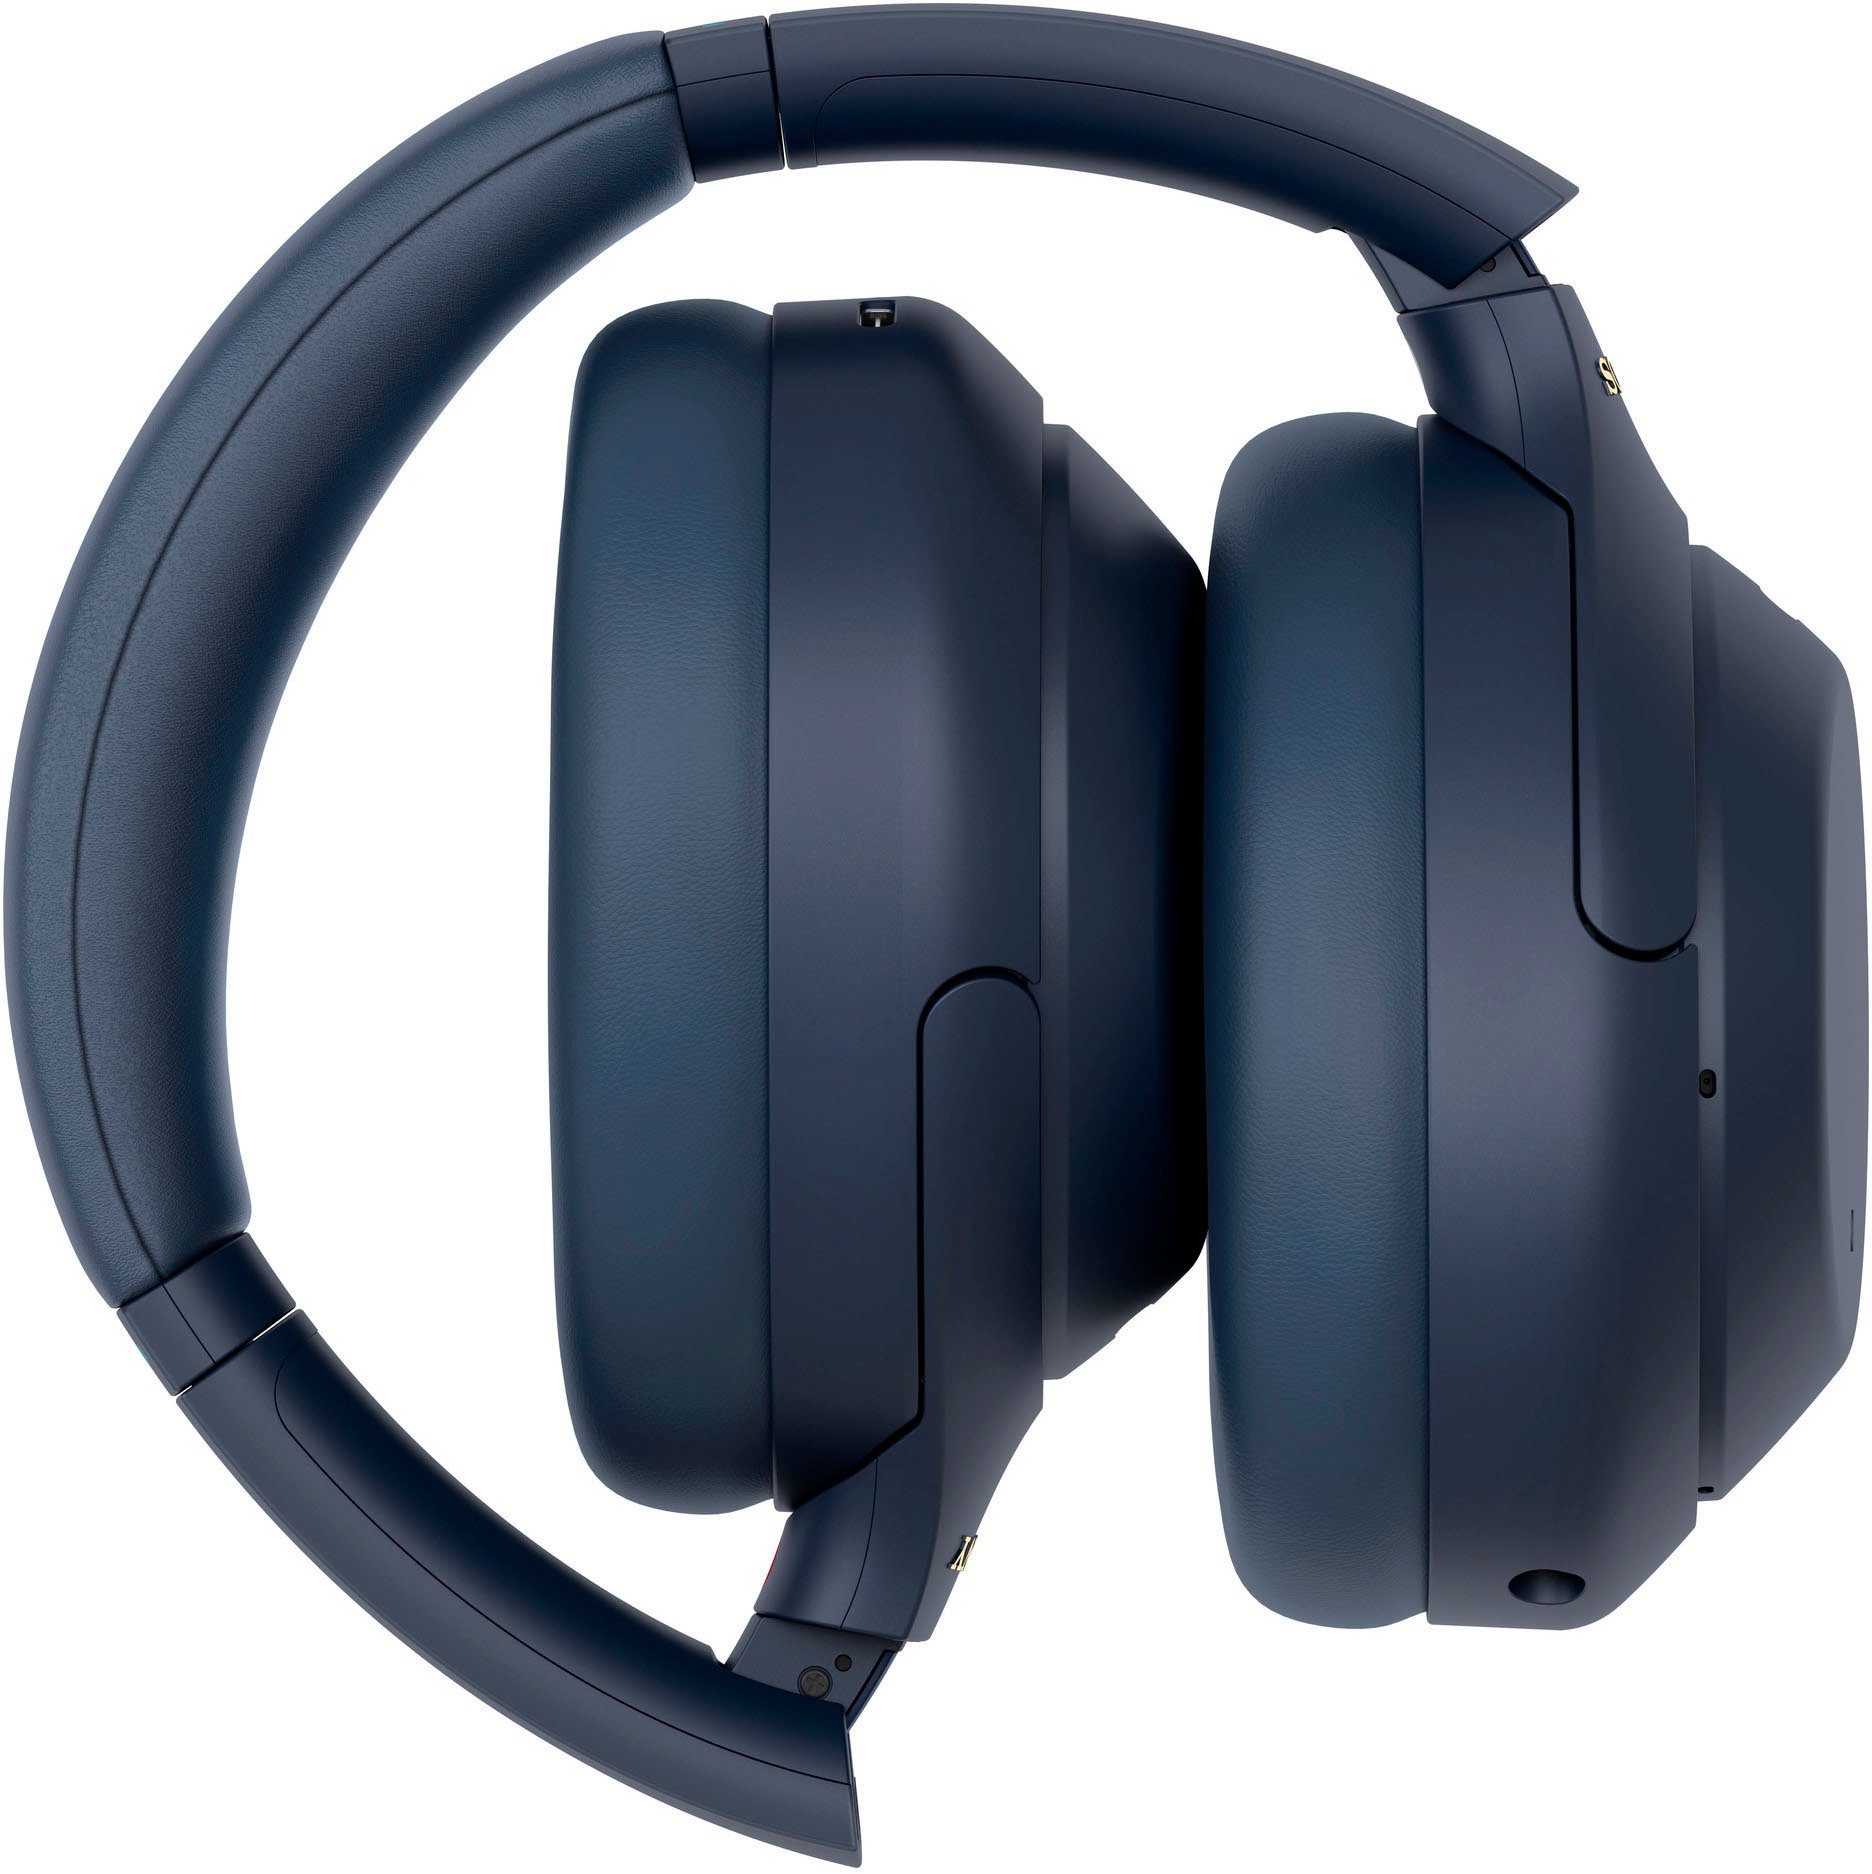 Sony WH-1000XM4 kabelloser Touch Schnellladefunktion) via Sensor, One-Touch blau NFC, Bluetooth, Over-Ear-Kopfhörer NFC, Verbindung (Noise-Cancelling